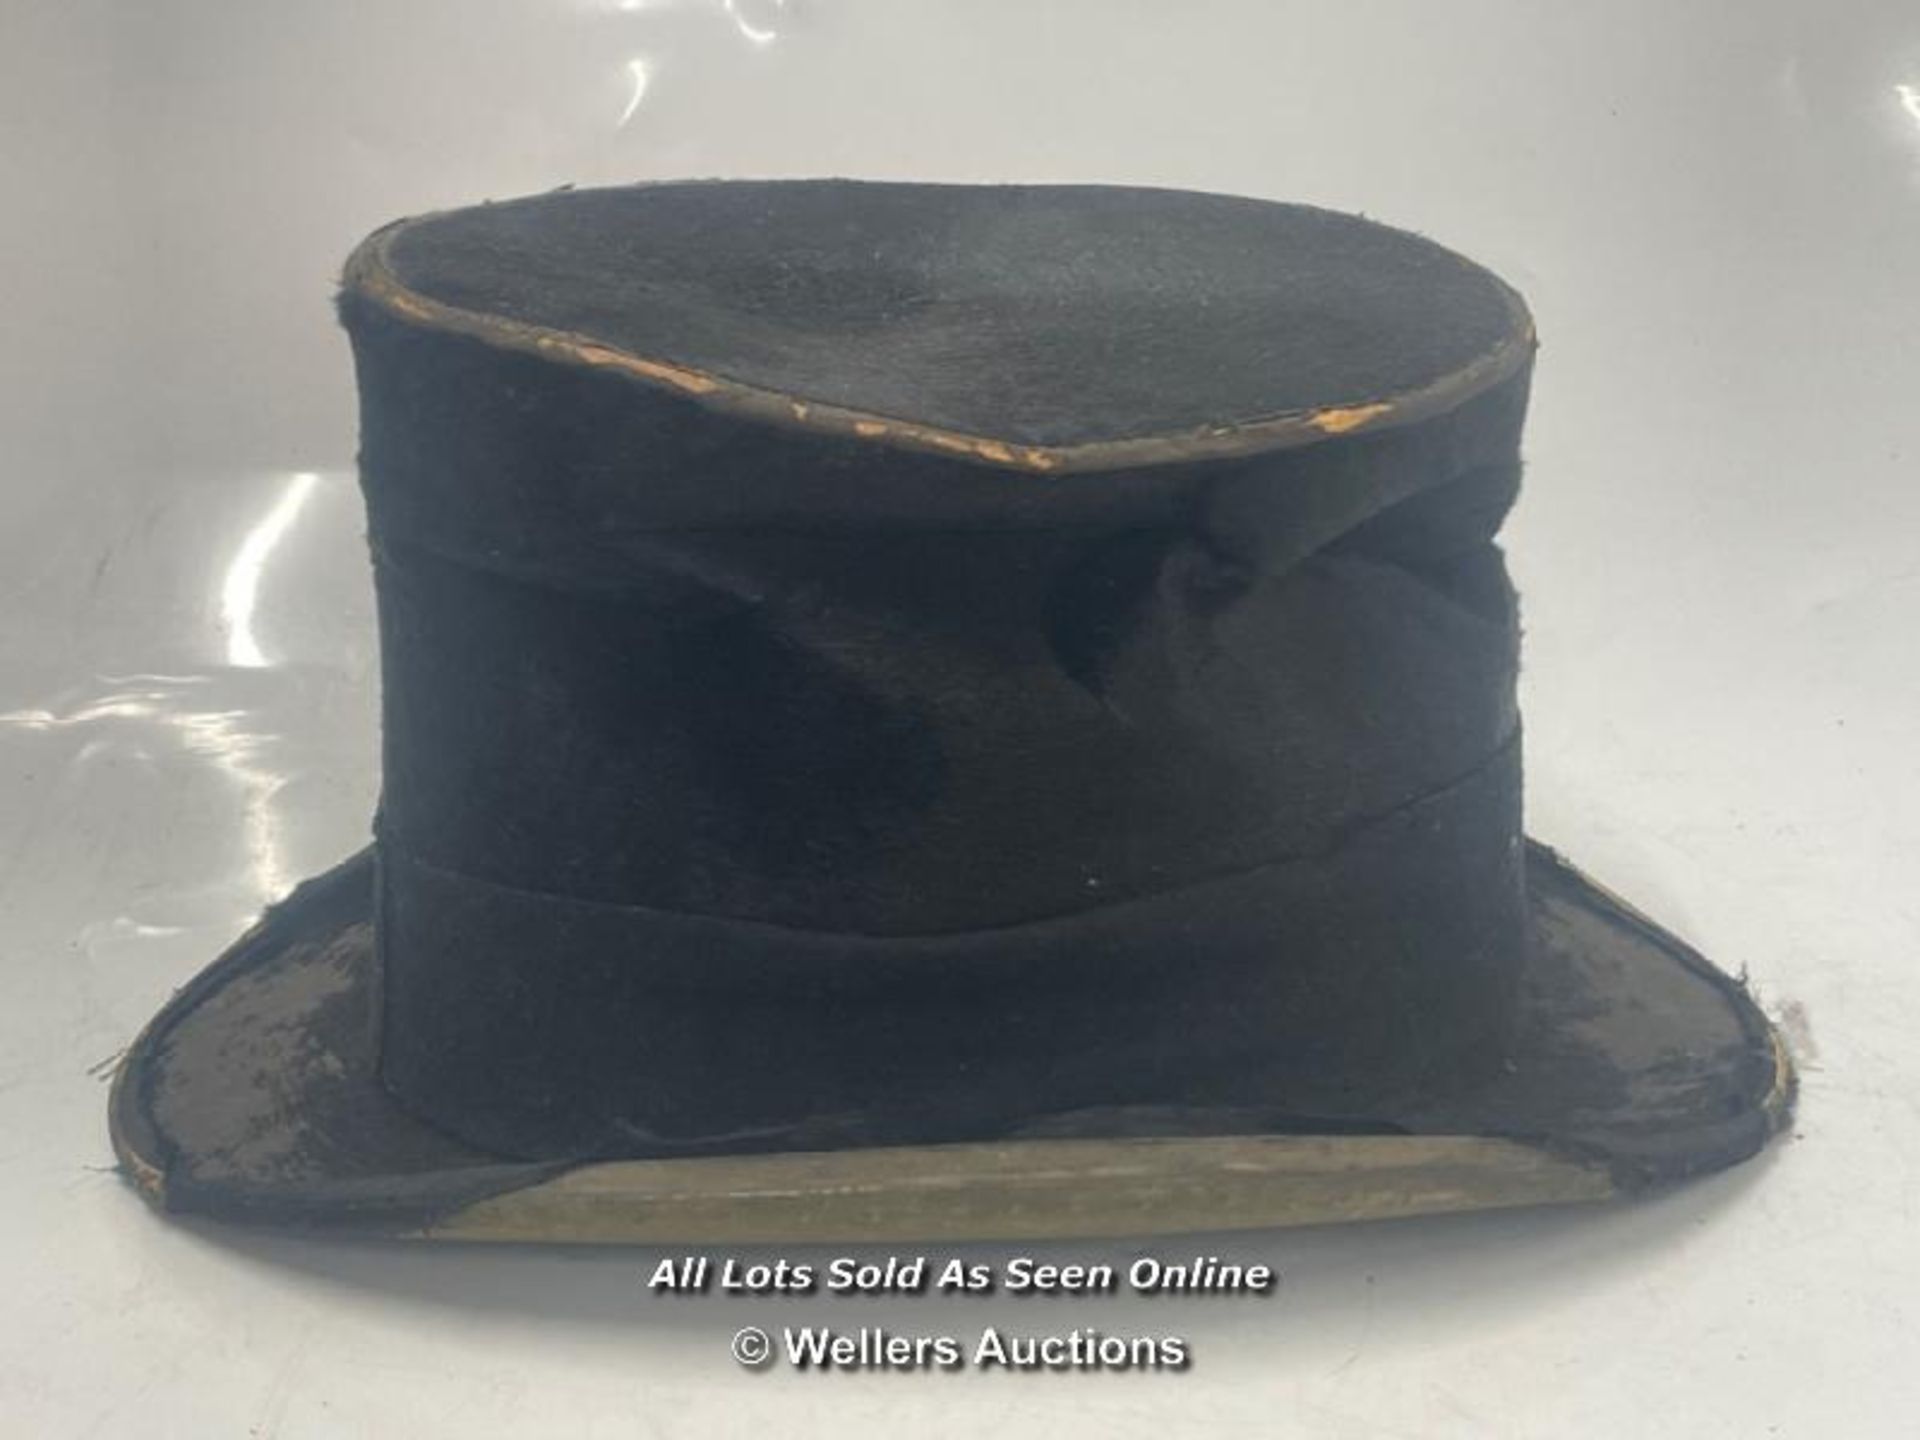 ANTIQUE HENRY HEATH TOP HAT. 15.5 X 19.5CM HEAD SIZE. IN NEED OF RESTORATION - Image 2 of 4